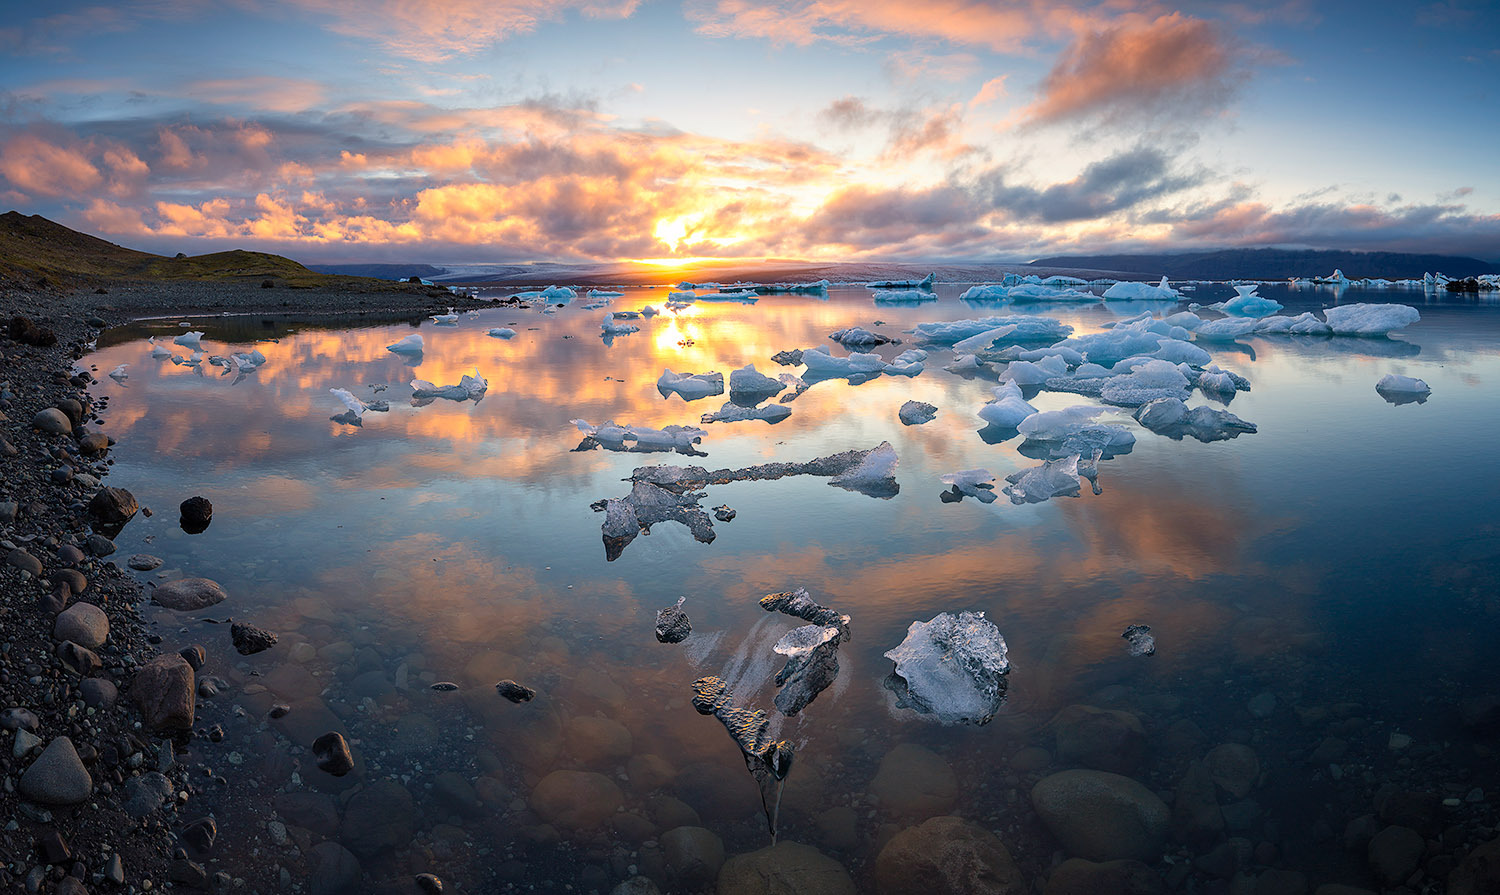 Clean lagoon, Iceland | landscape, nature, sky, clouds, ice, water, Iceland, lagoon, sun, stones